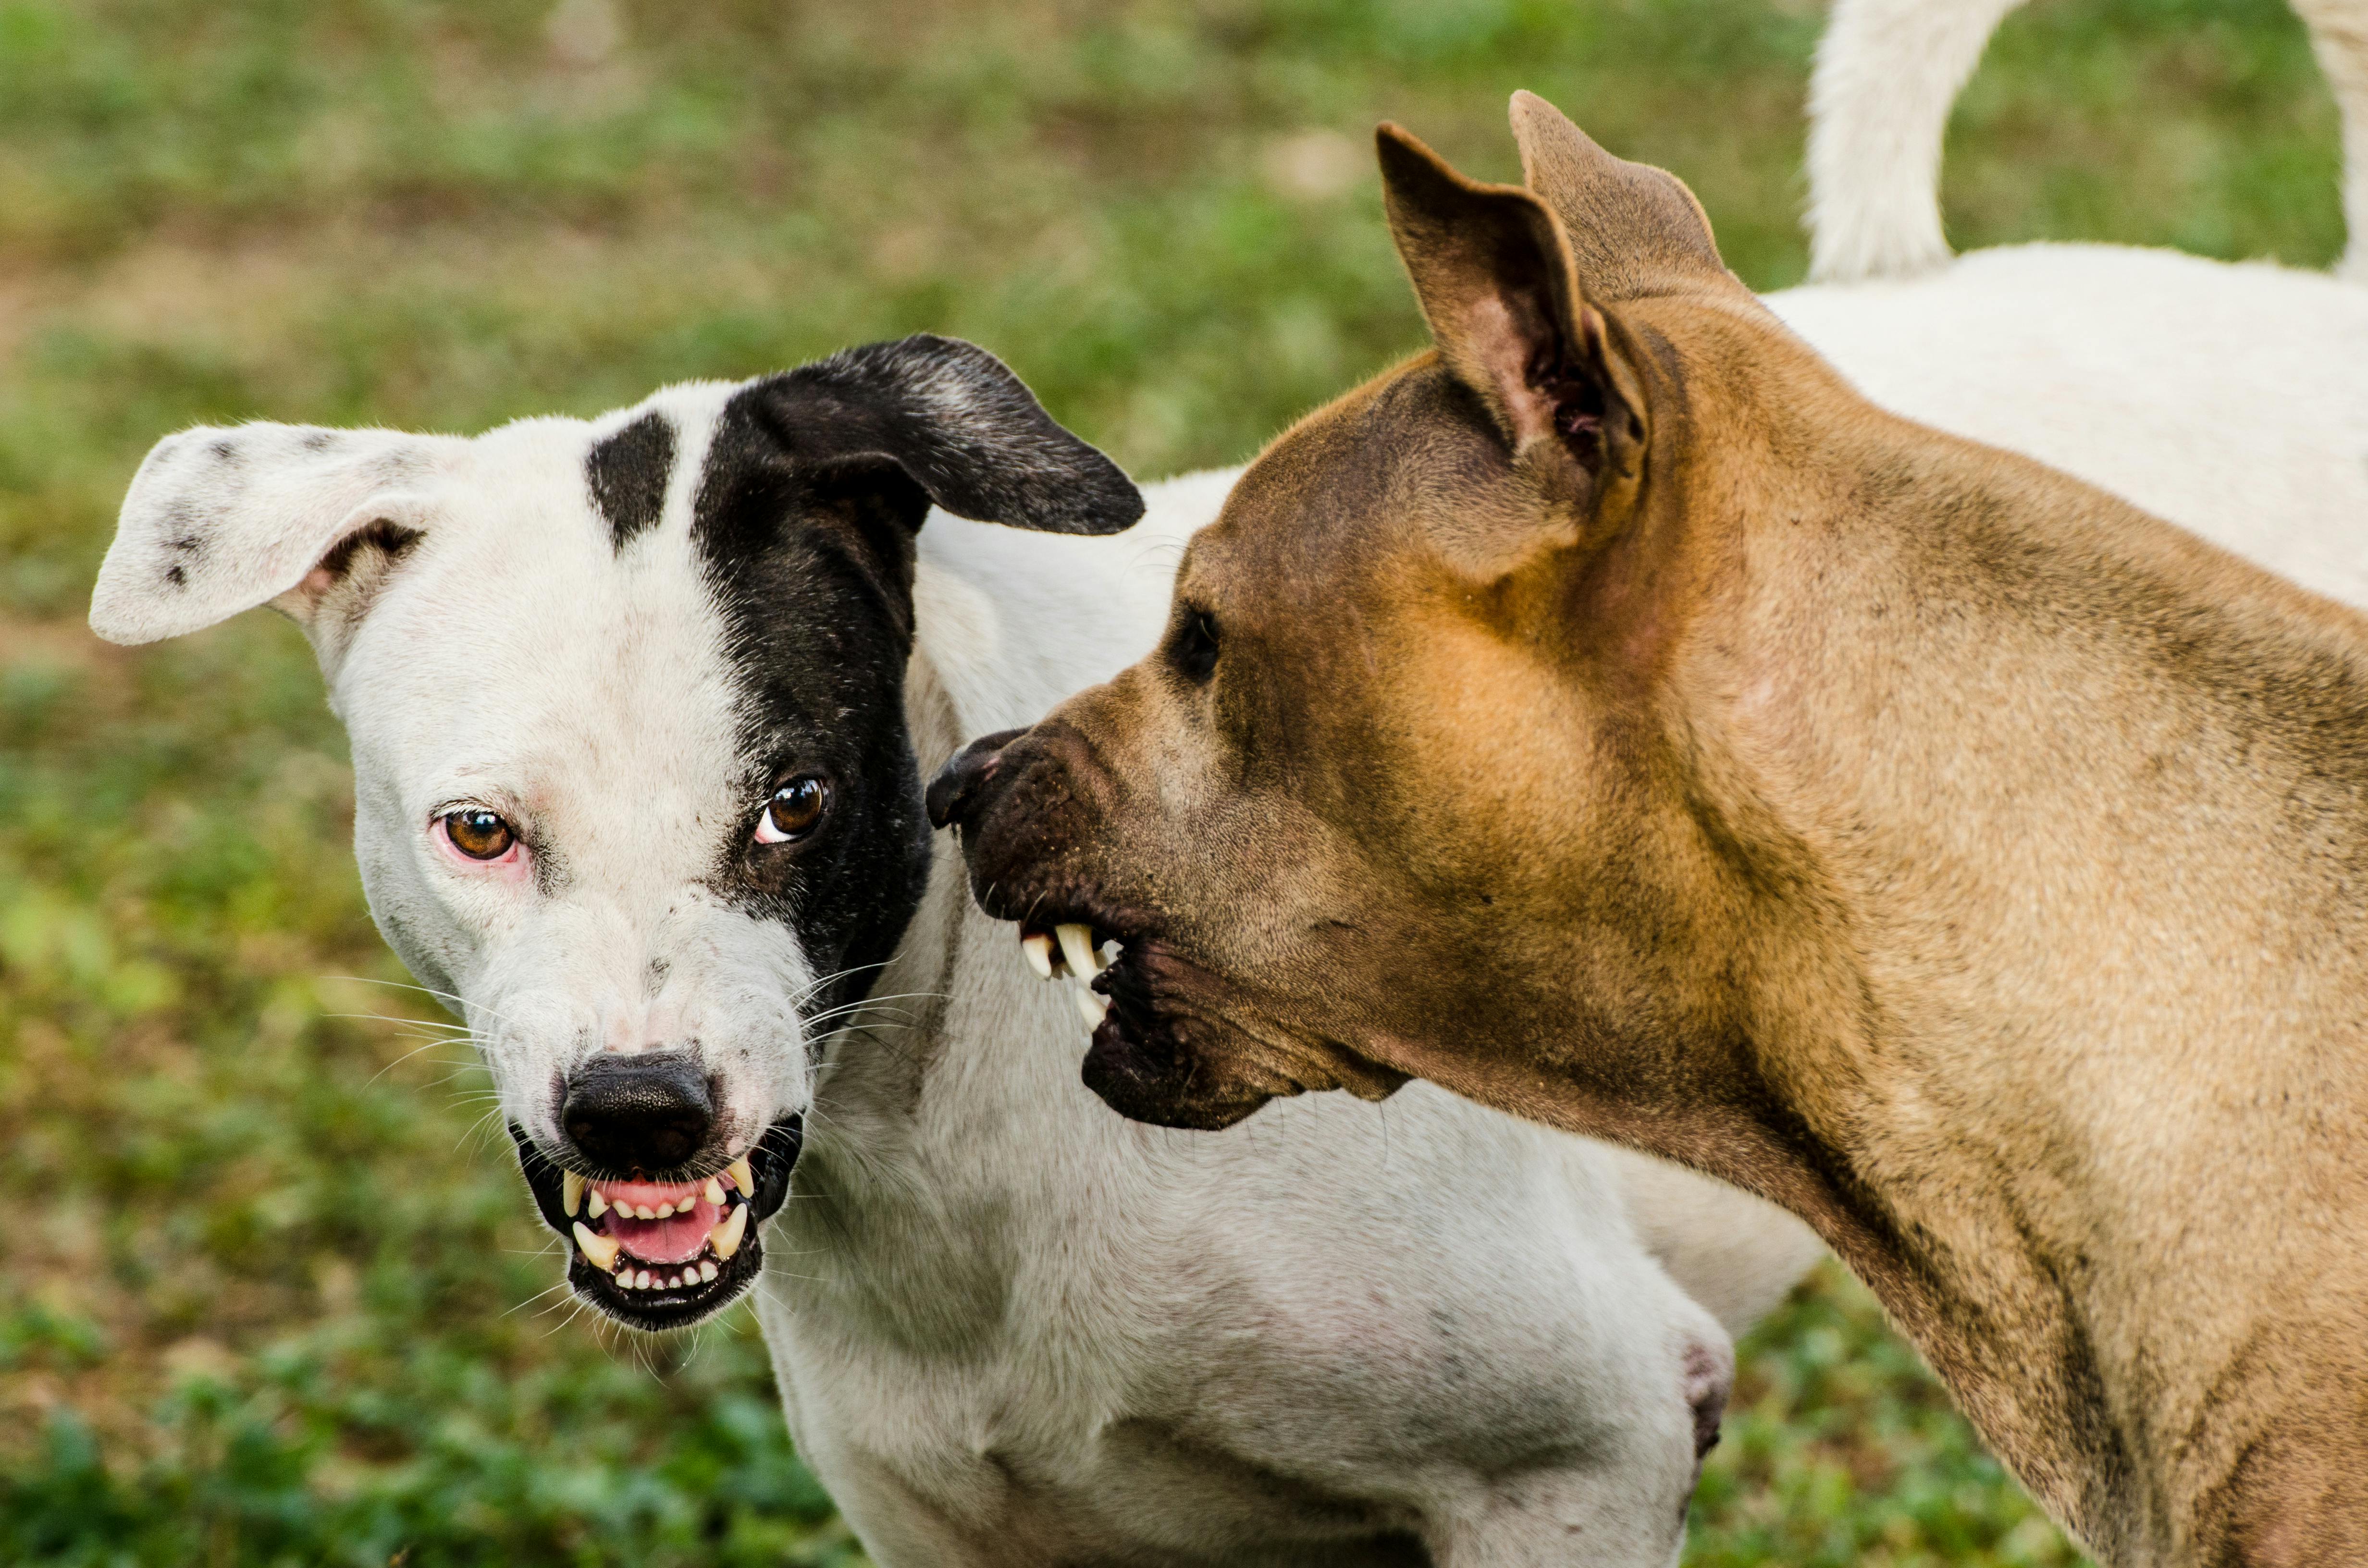 2 dogs showing aggressive behavior including snarling, baring teeth, hard stare, ears forward, body tense